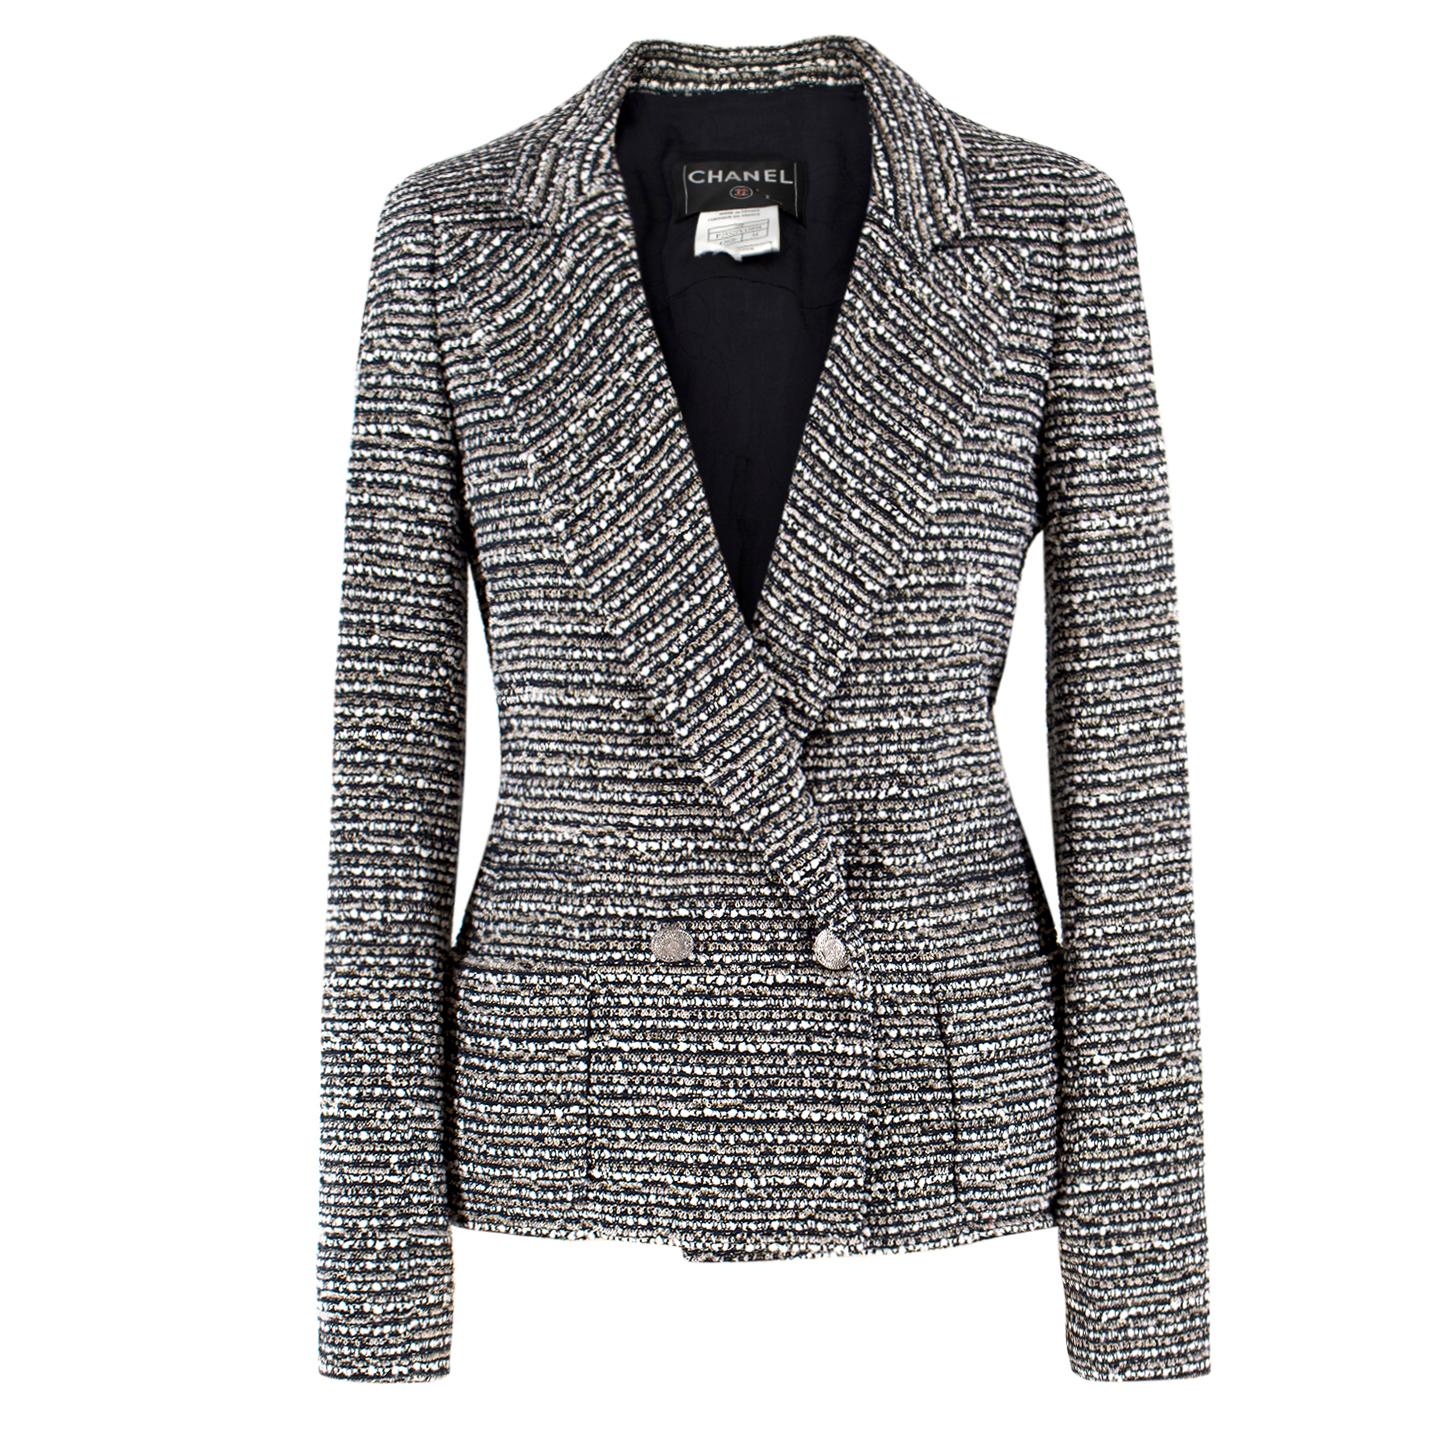 Chanel Black and White Tweed Jacket US 2 For Sale